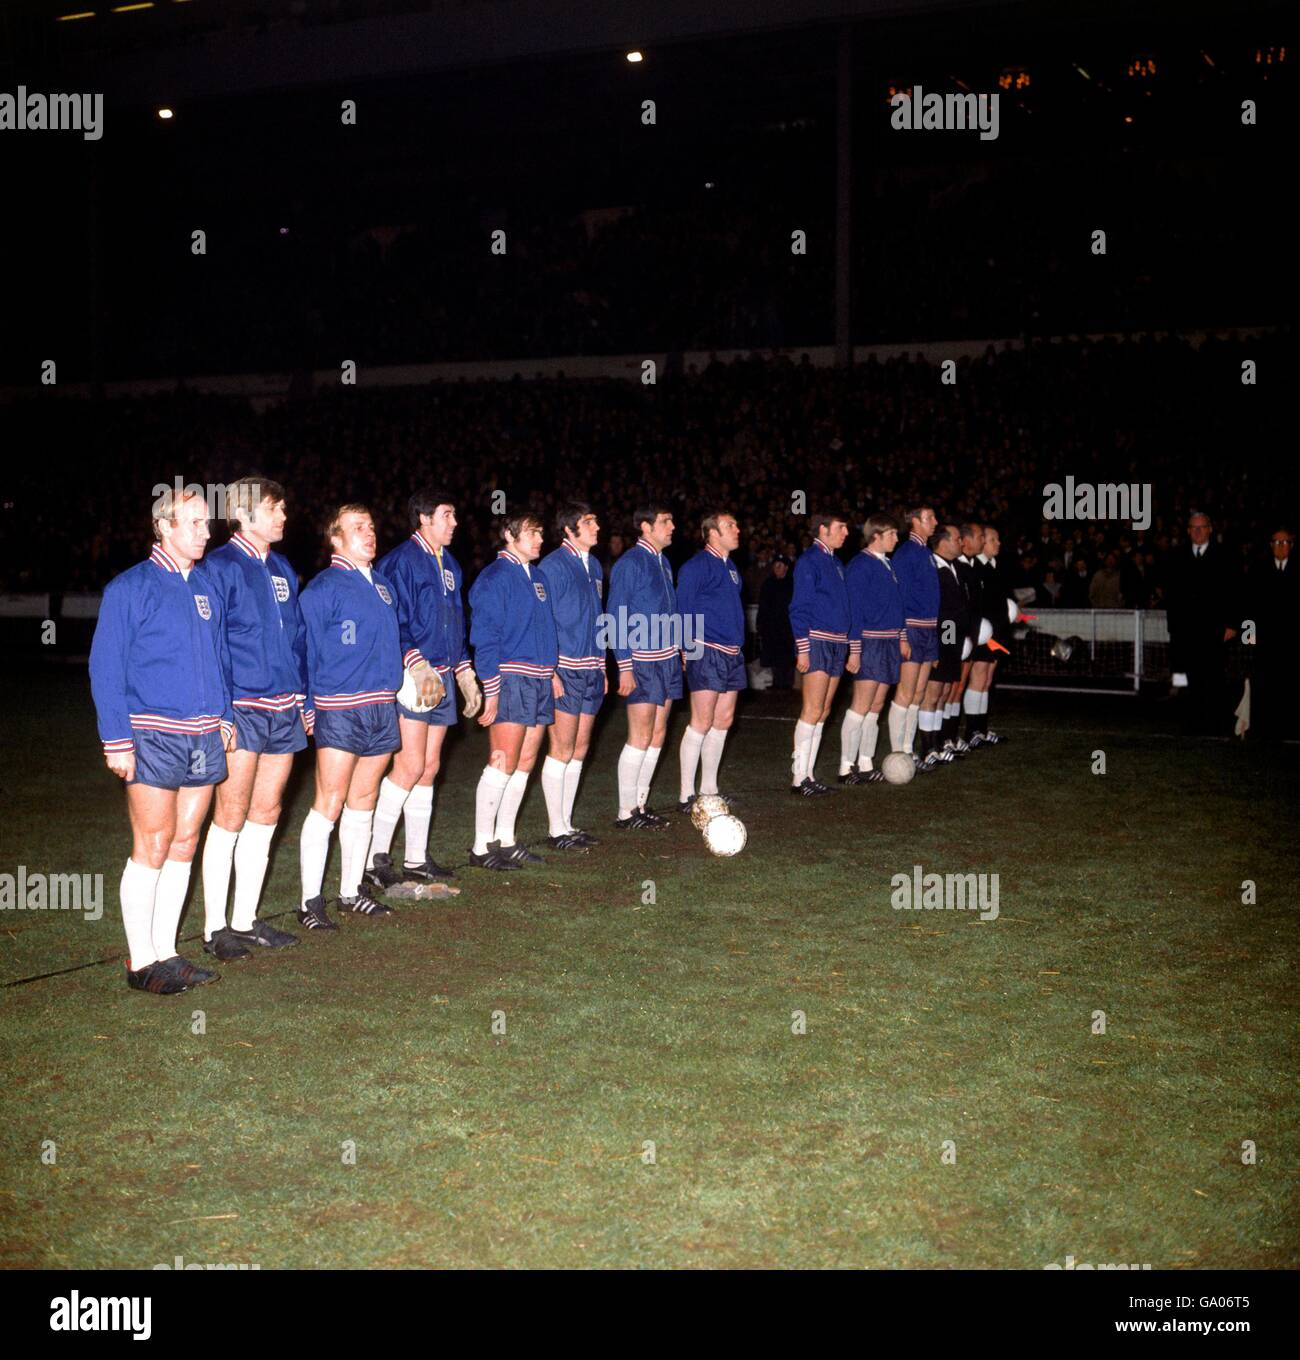 (L-R) The England team line up before the match: Bobby Charlton, Keith Newton, Francis Lee, Gordon Banks, Terry Cooper, Norman Hunter, Ian Storey-Moore, Mick Jones, Martin Peters, Colin Bell, Jack Charlton Stock Photo